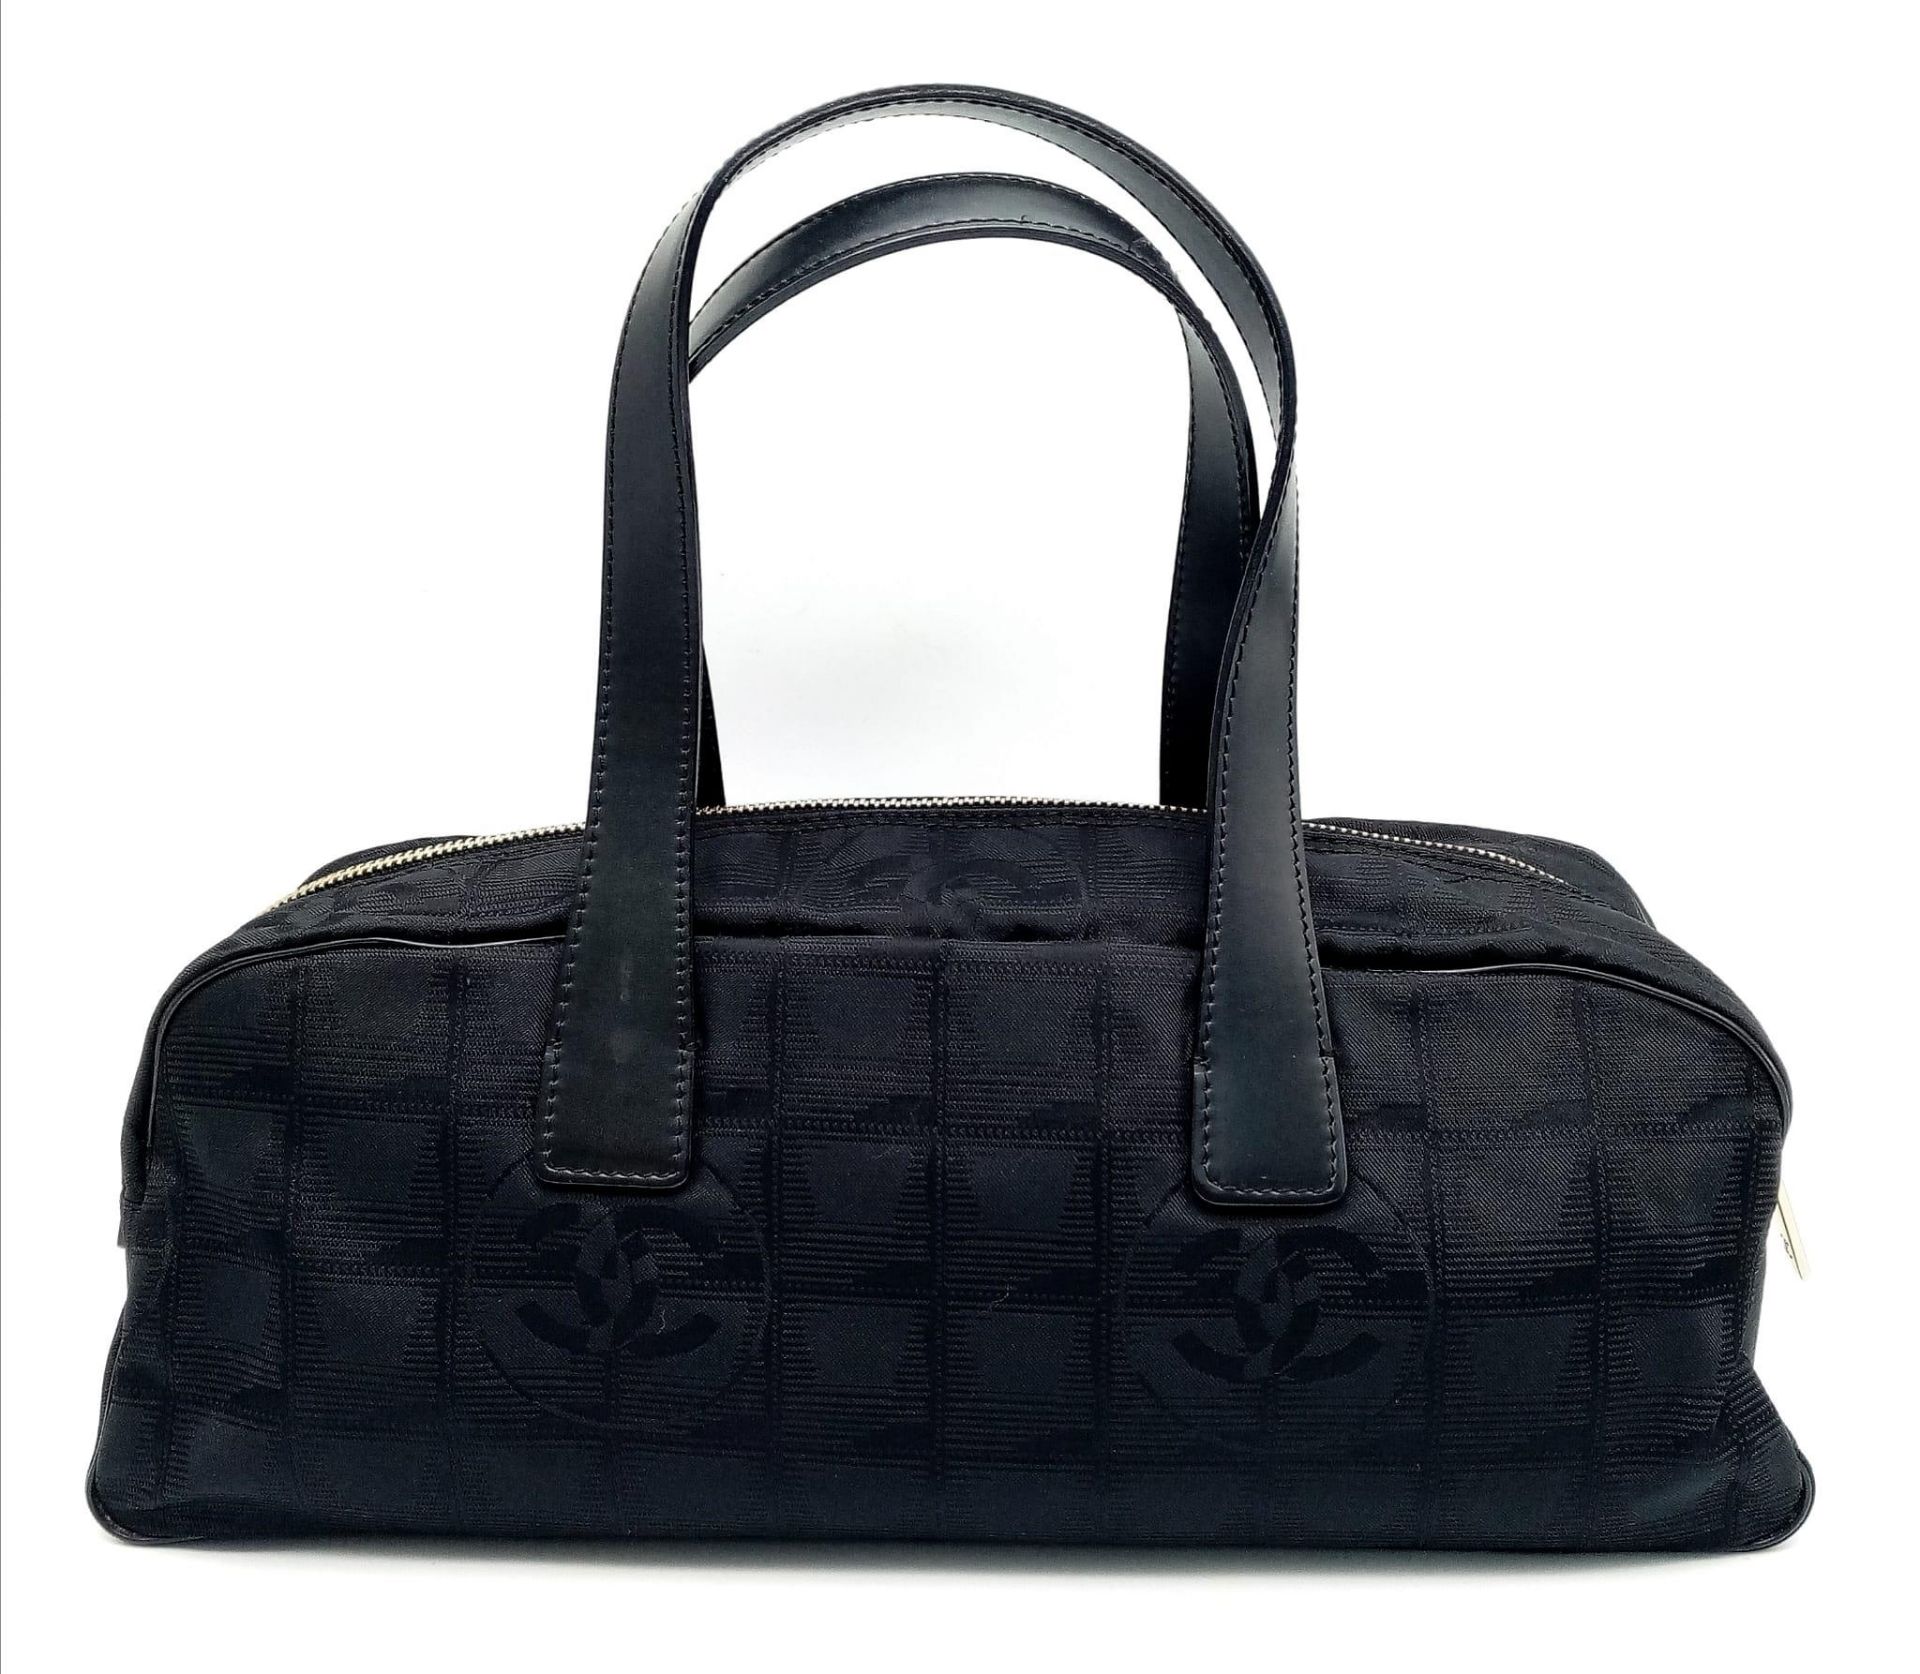 A Chanel Black Travel Line Bag. Canvas exterior with leather straps, four protective base studs